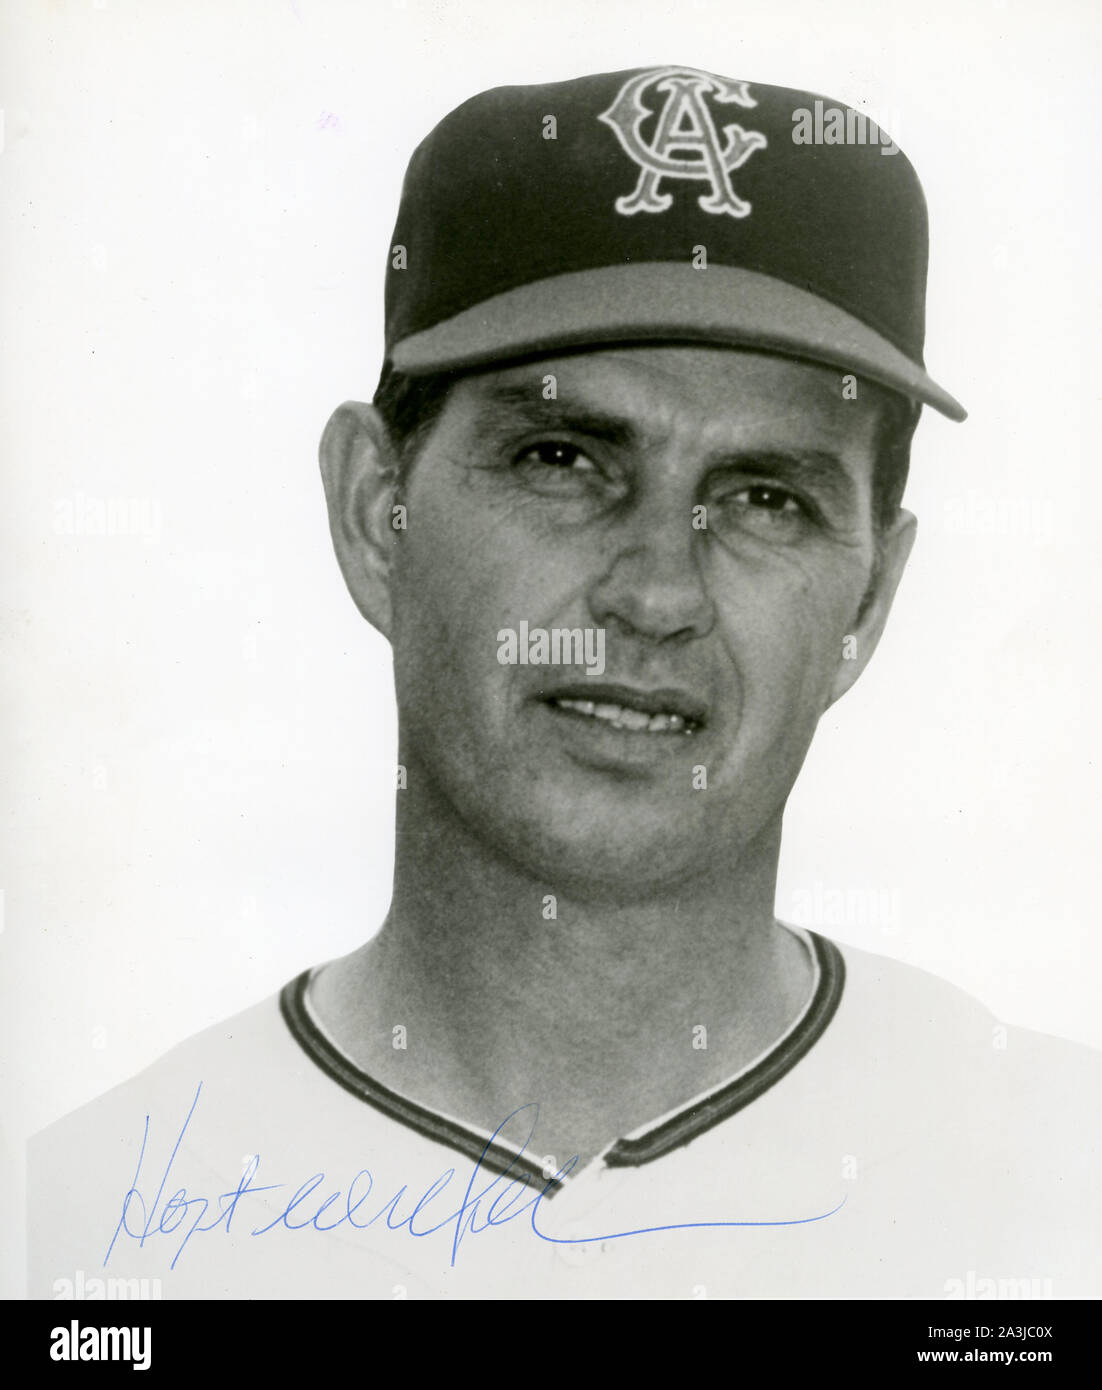 Autographed photo of Hall of Fame baseball pitcher Hoyt Wilhelm  with  the California Angels. Stock Photo